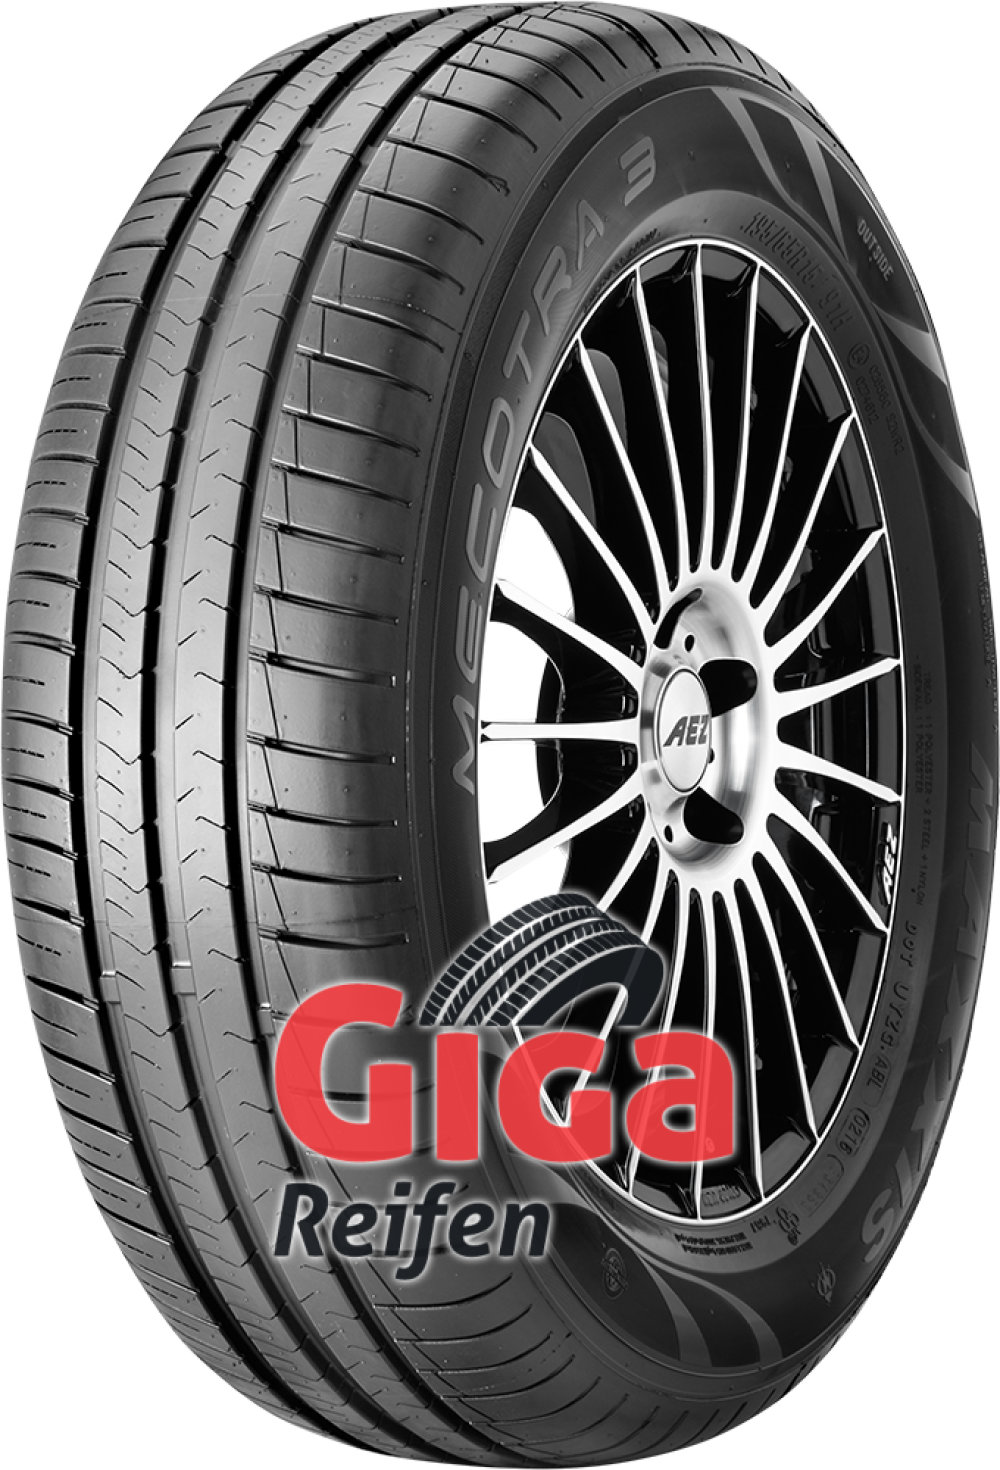 Maxxis Mecotra 3 ( 145/60 R13 66T ) von Maxxis